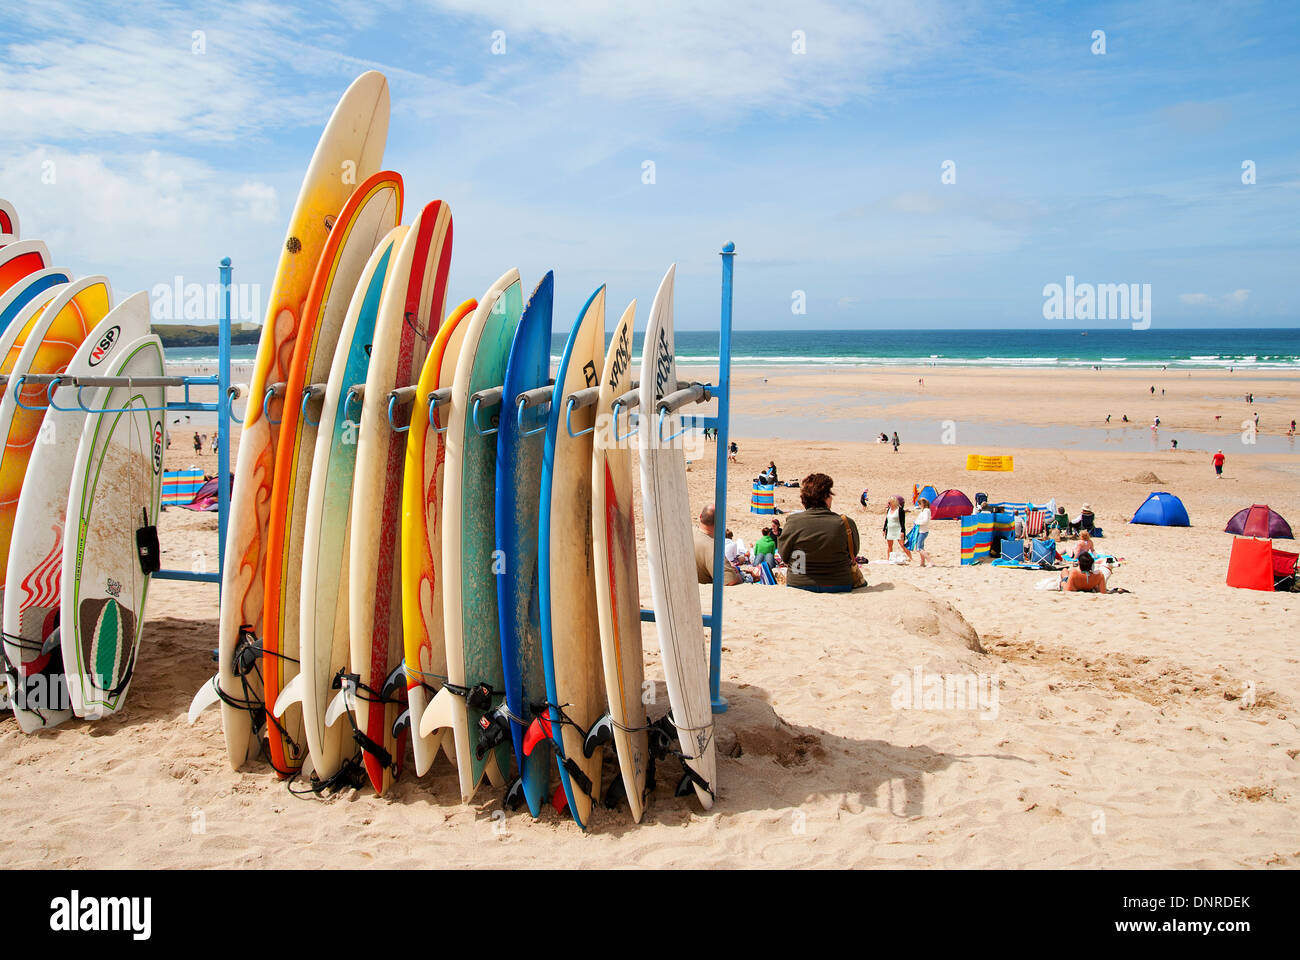 surf boards for hire at fistral beach, newquay, cornwall, uk Stock Photo